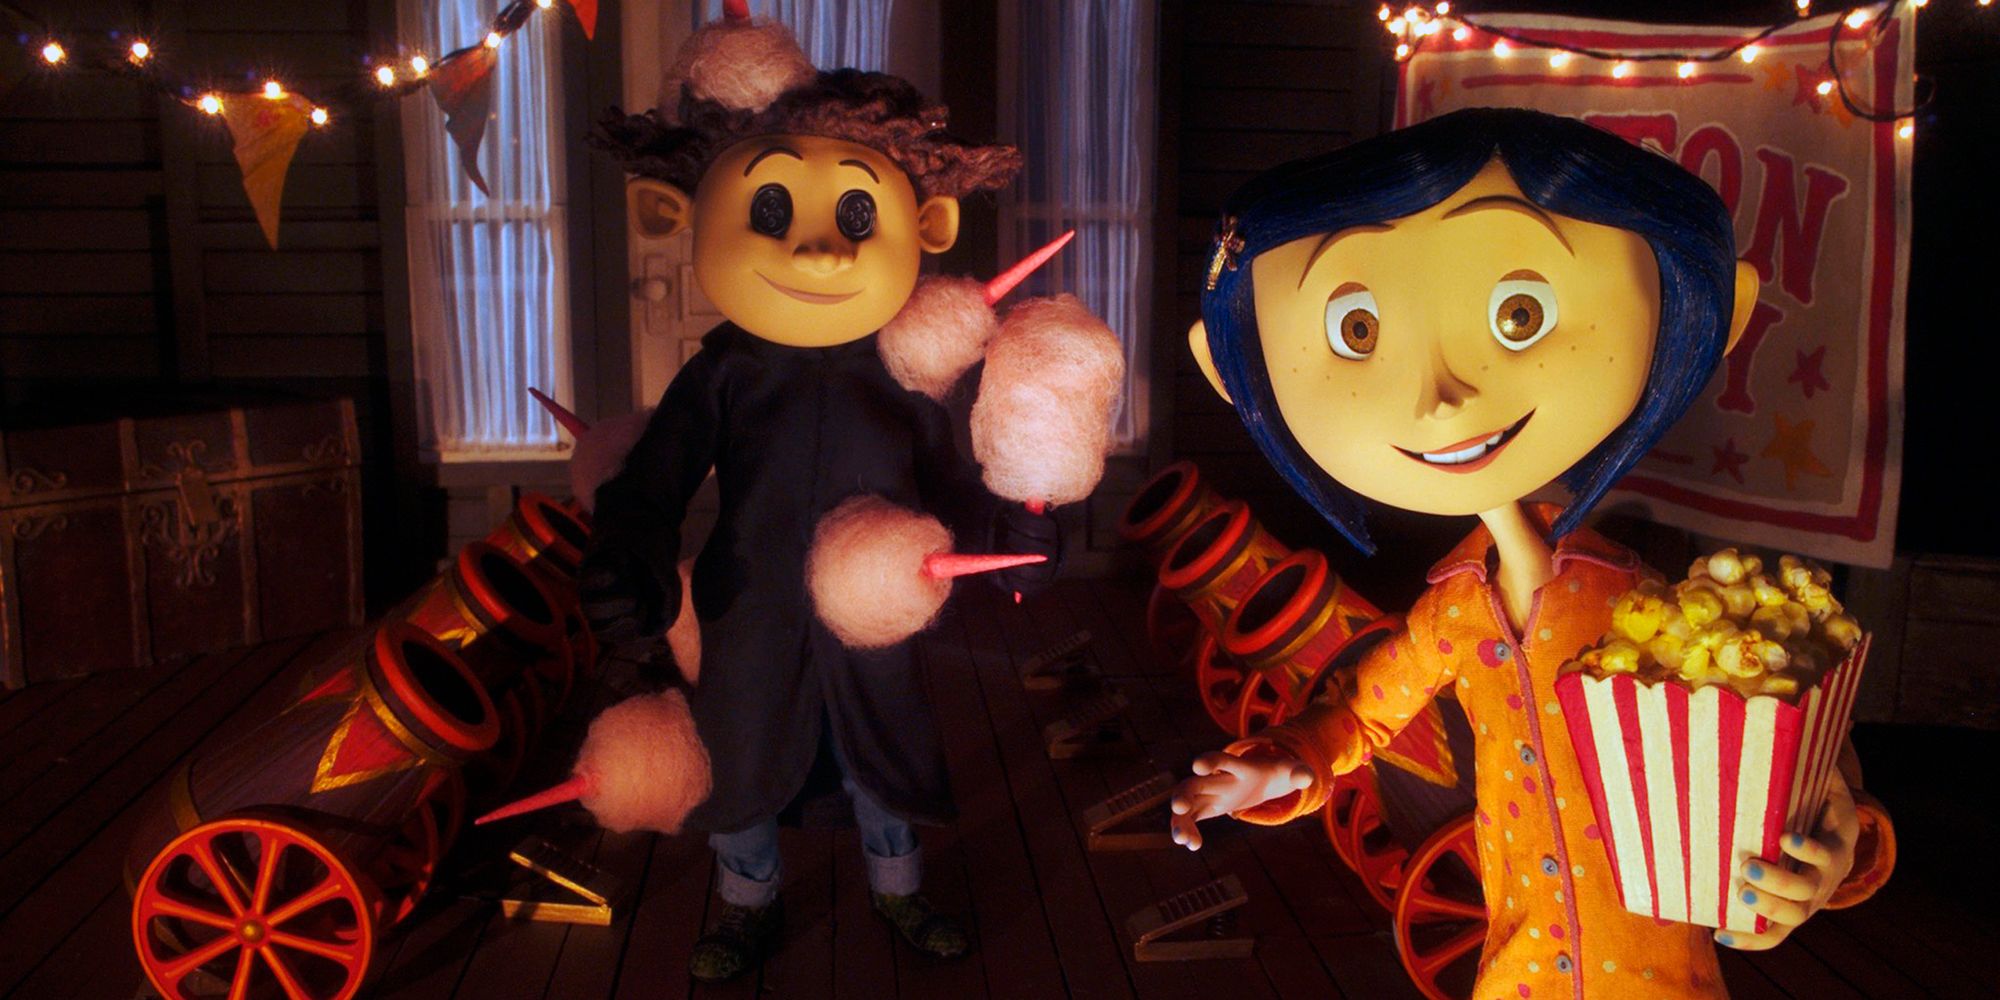 'Coraline' - a horror movie for kids and adults alike - is very watchable